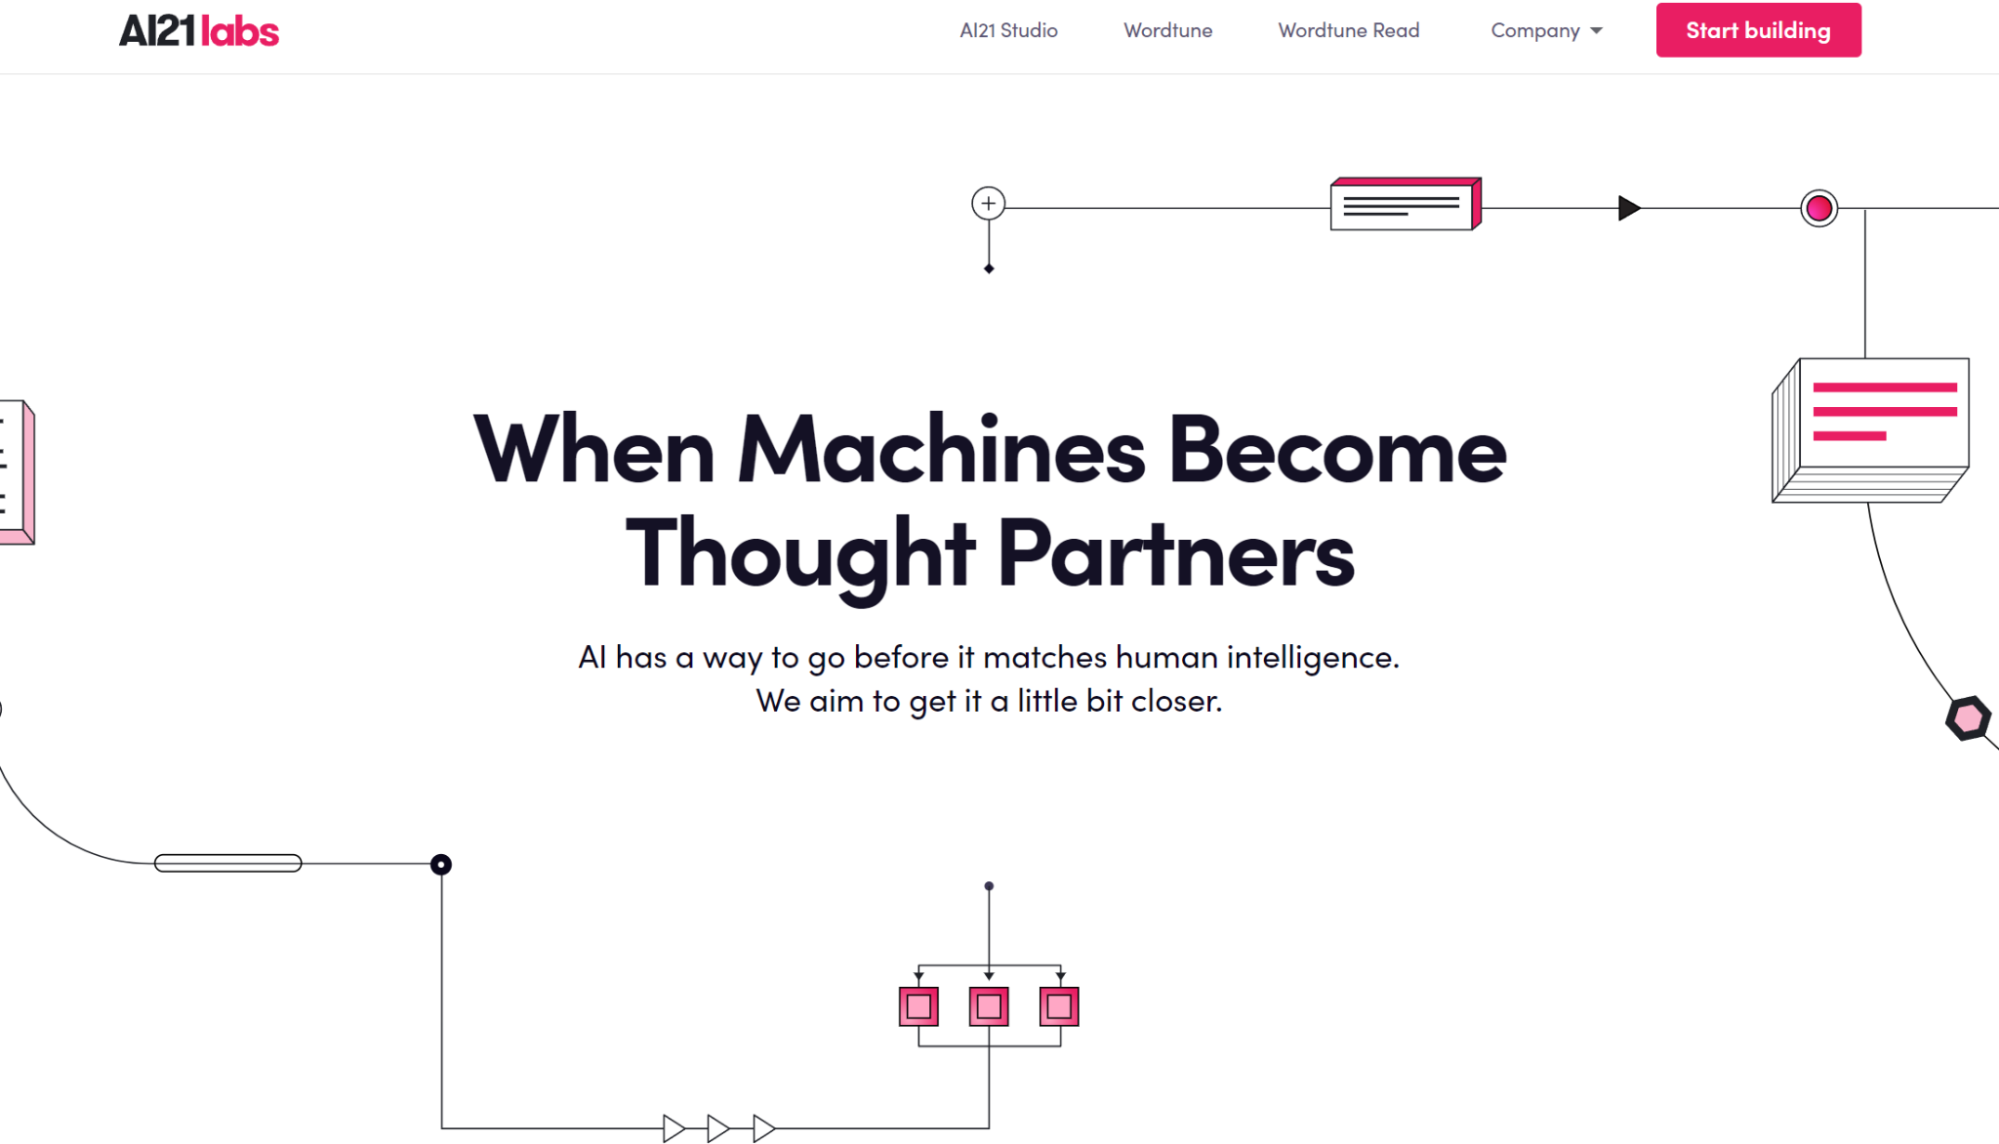 AI21 Labs creates language models and tools for that help machines become thought partners